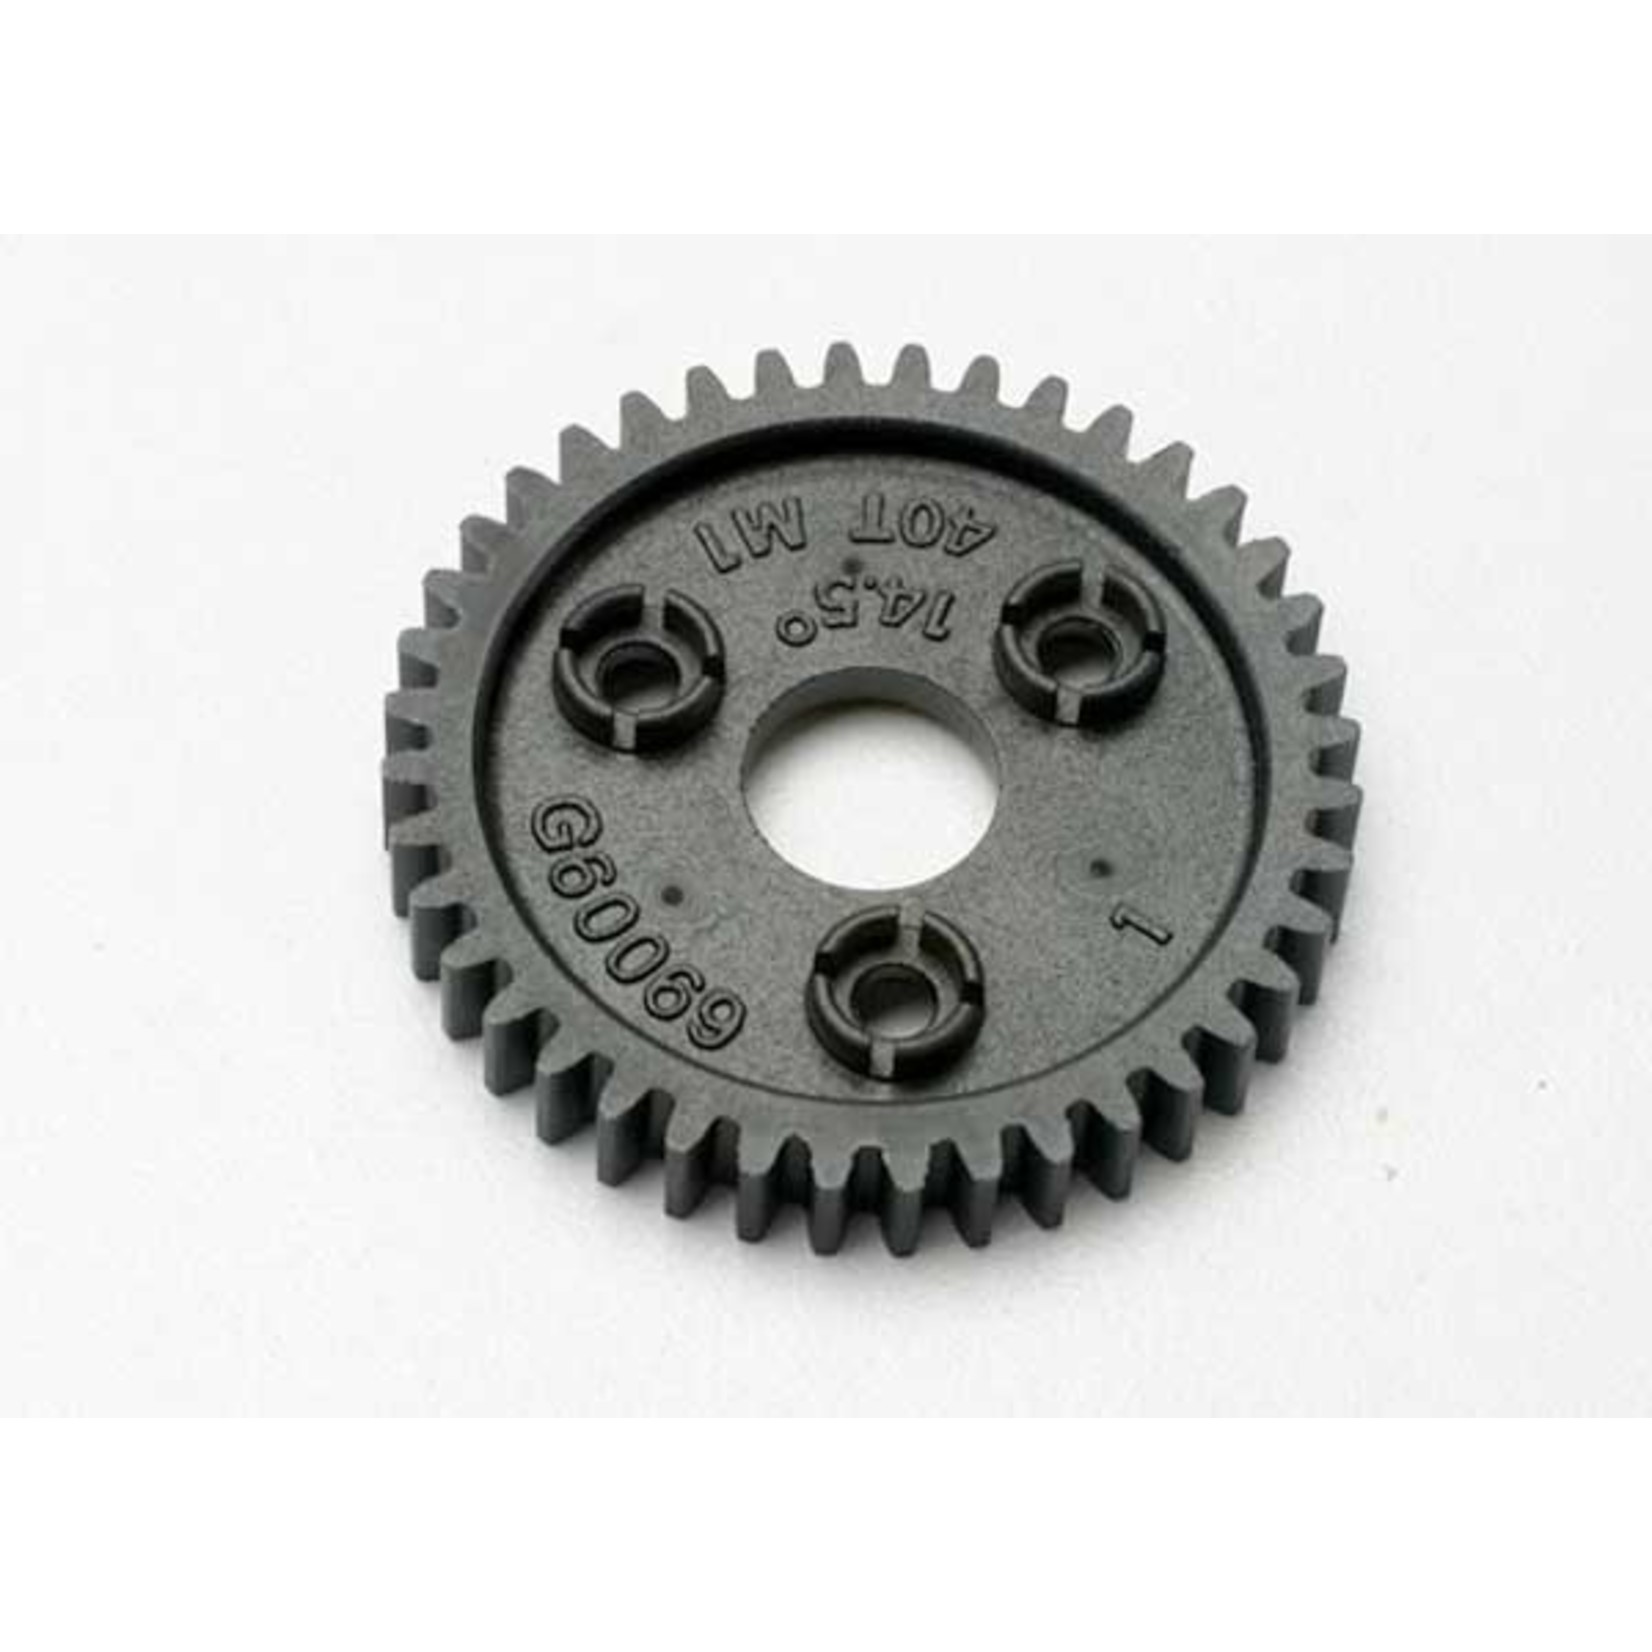 Traxxas 3955 Spur gear, 40-tooth (1.0 metric pitch)